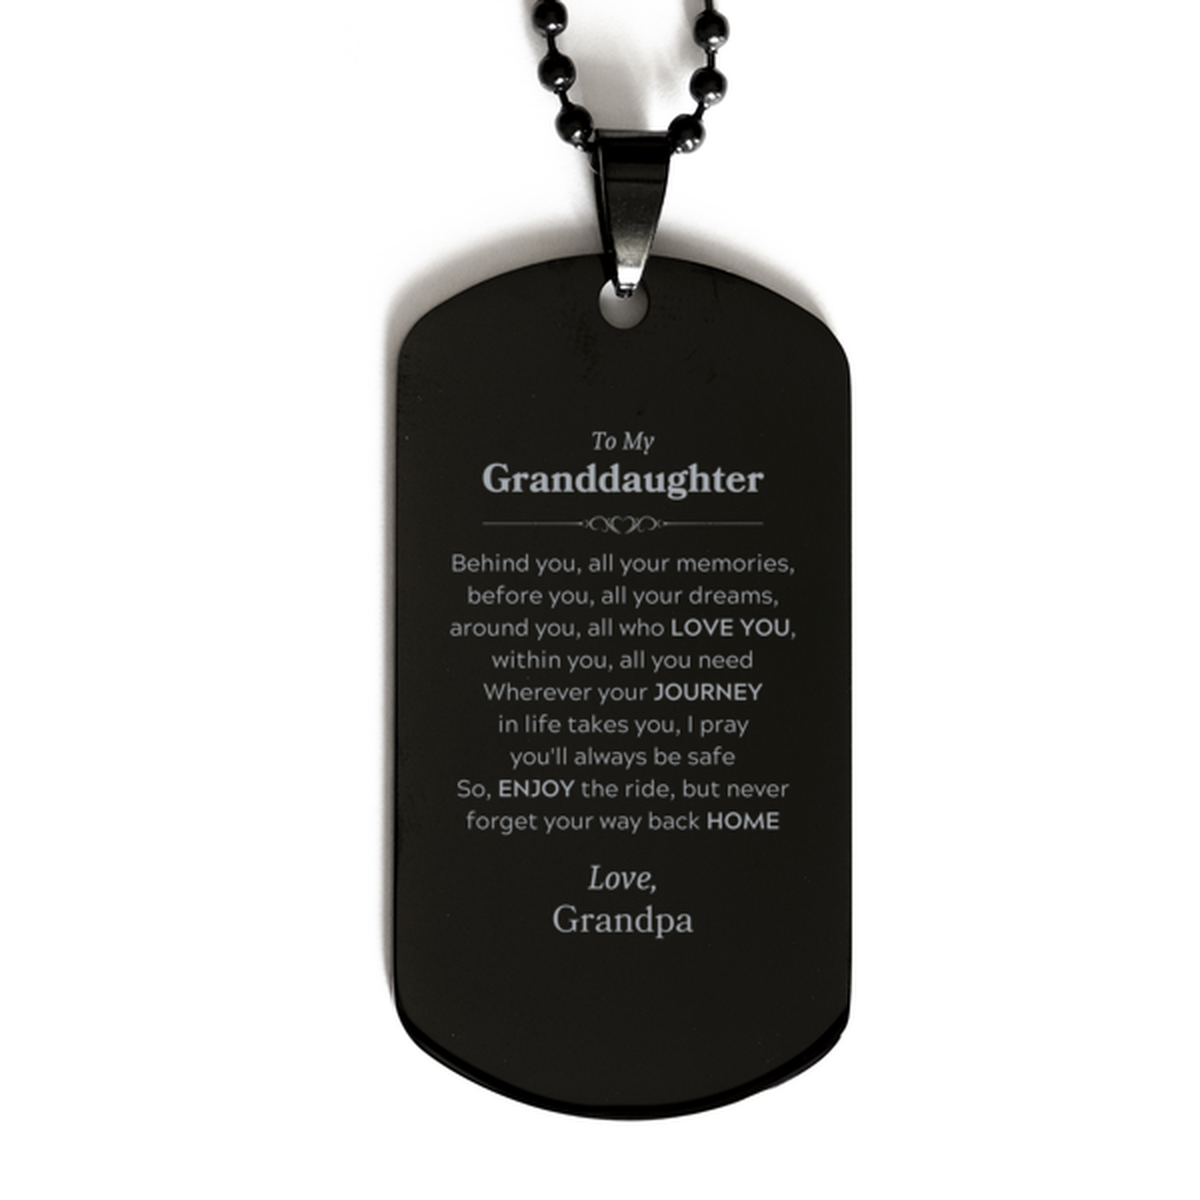 To My Granddaughter Graduation Gifts from Grandpa, Granddaughter Black Dog Tag Christmas Birthday Gifts for Granddaughter Behind you, all your memories, before you, all your dreams. Love, Grandpa